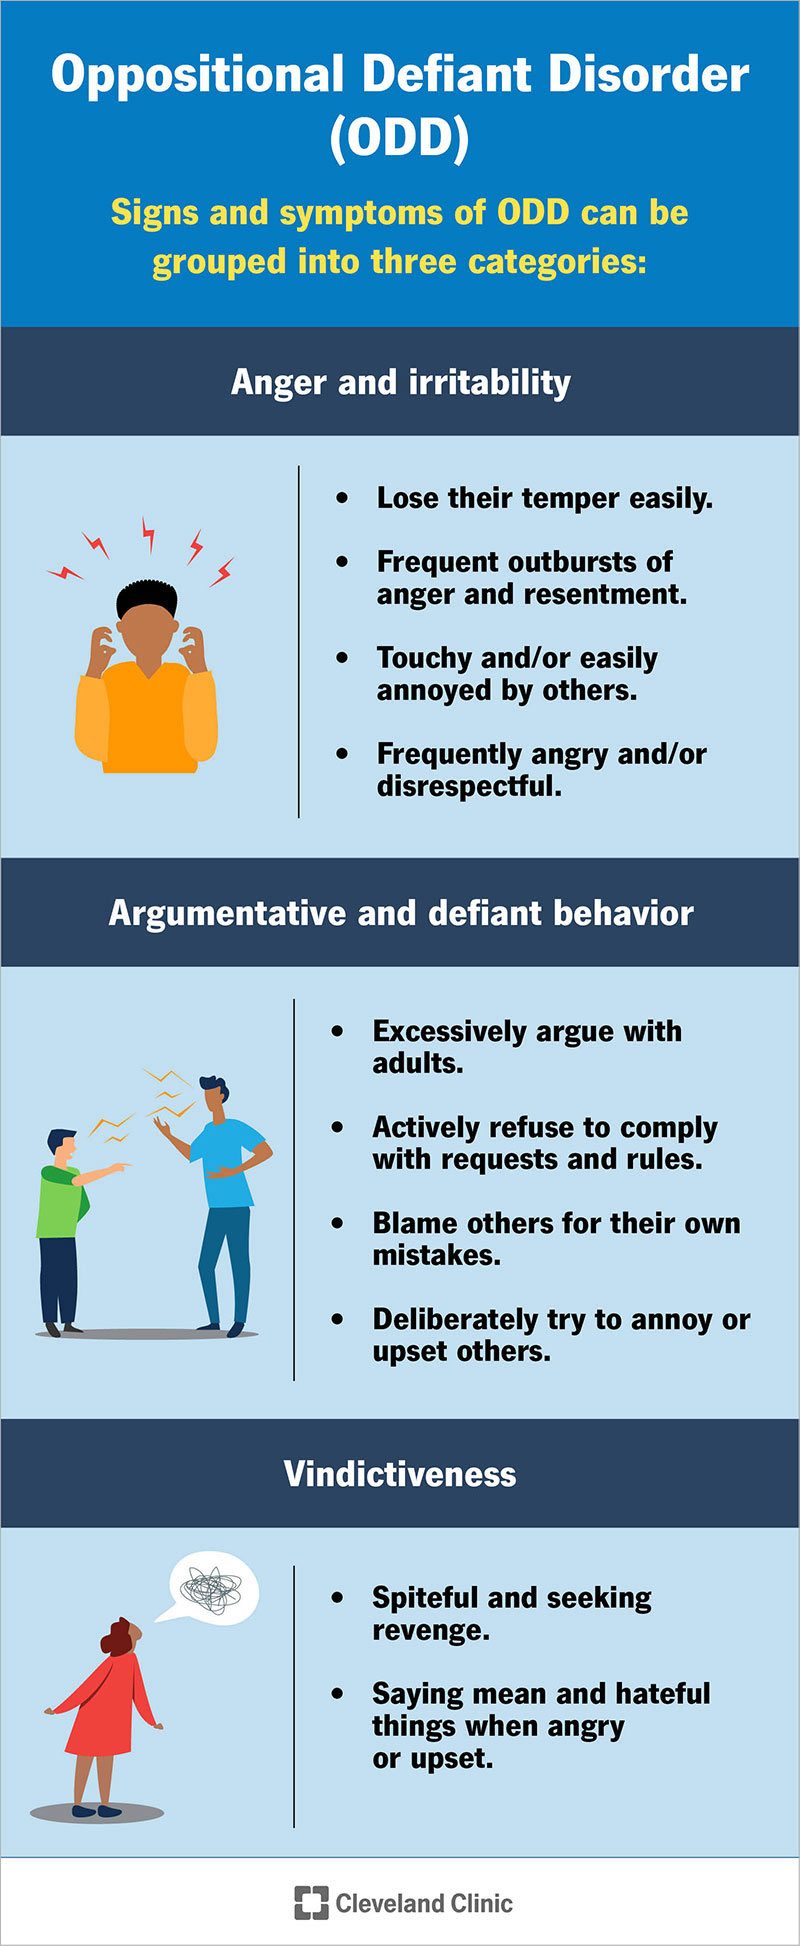 The signs of oppositional defiant disorder are grouped into three categories: anger and irritability, defiant behavior and vindictiveness.